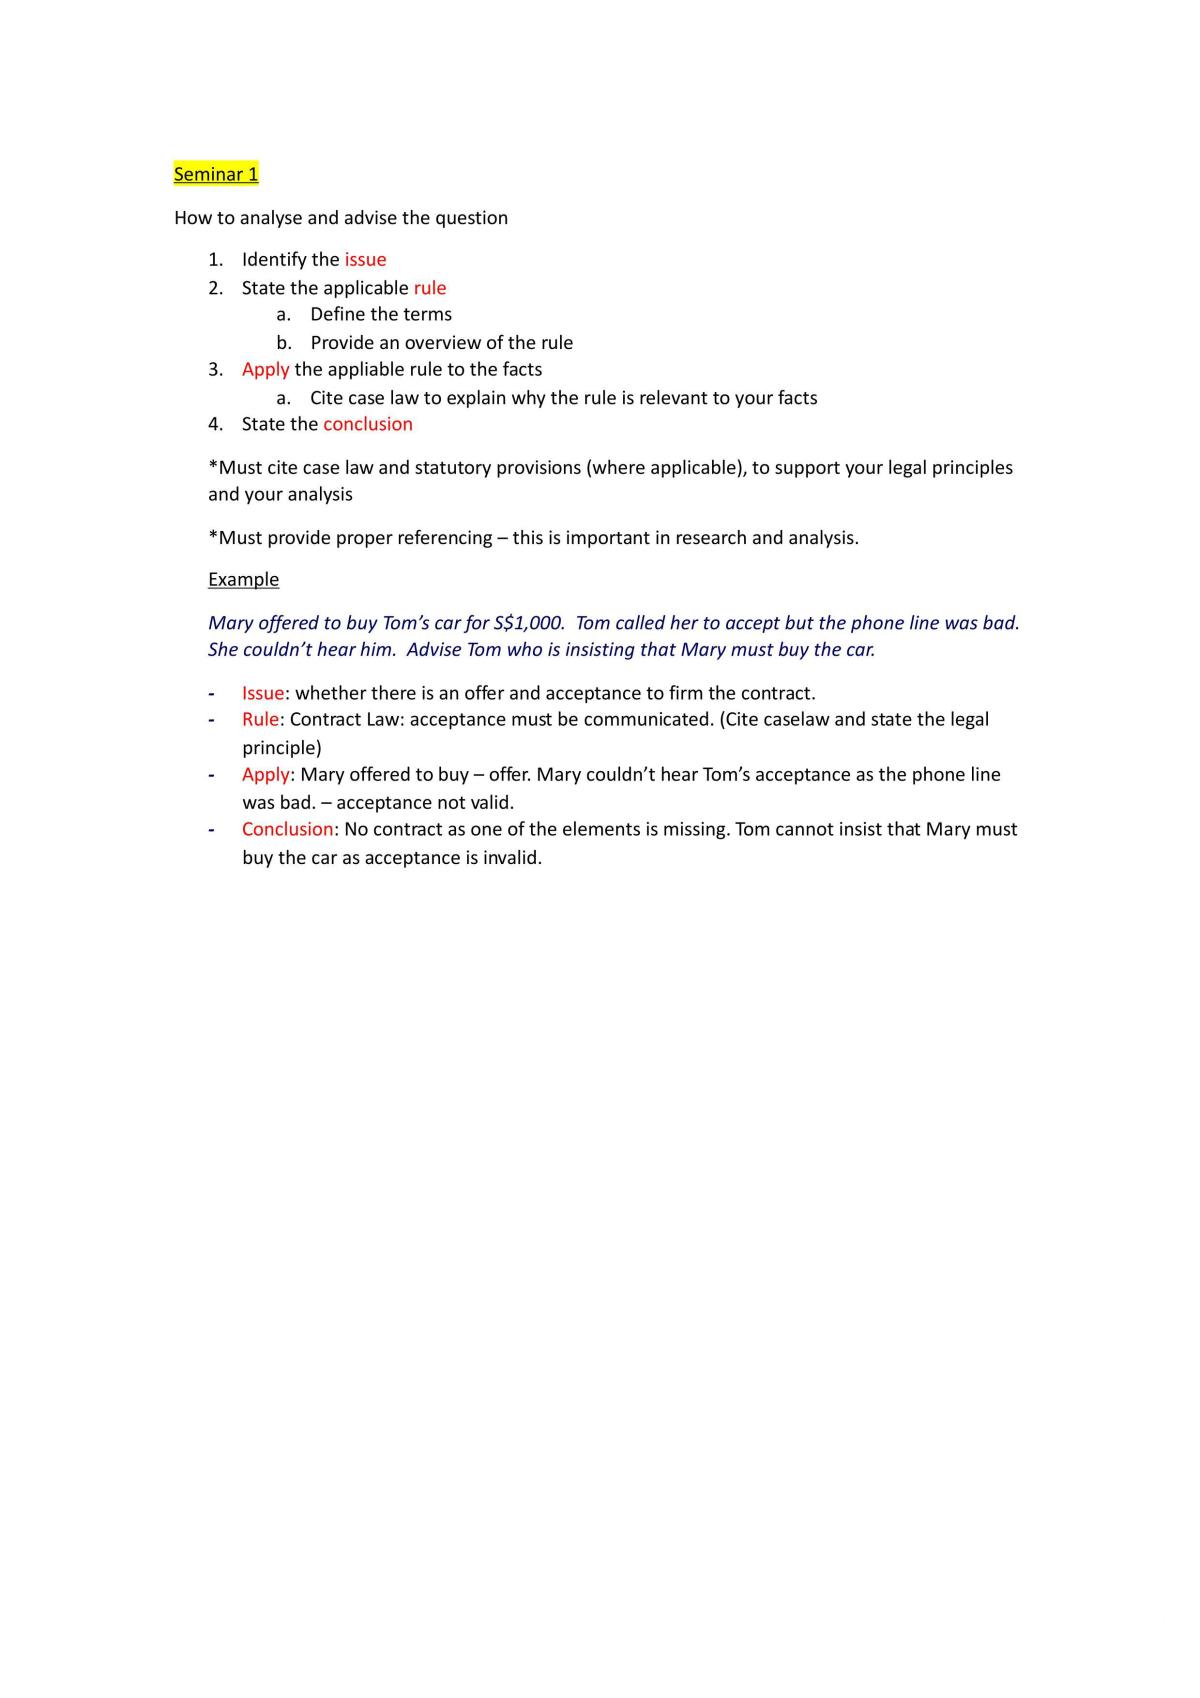 Contract and Agency Law Summary for seminars 1 to 6 - Page 1